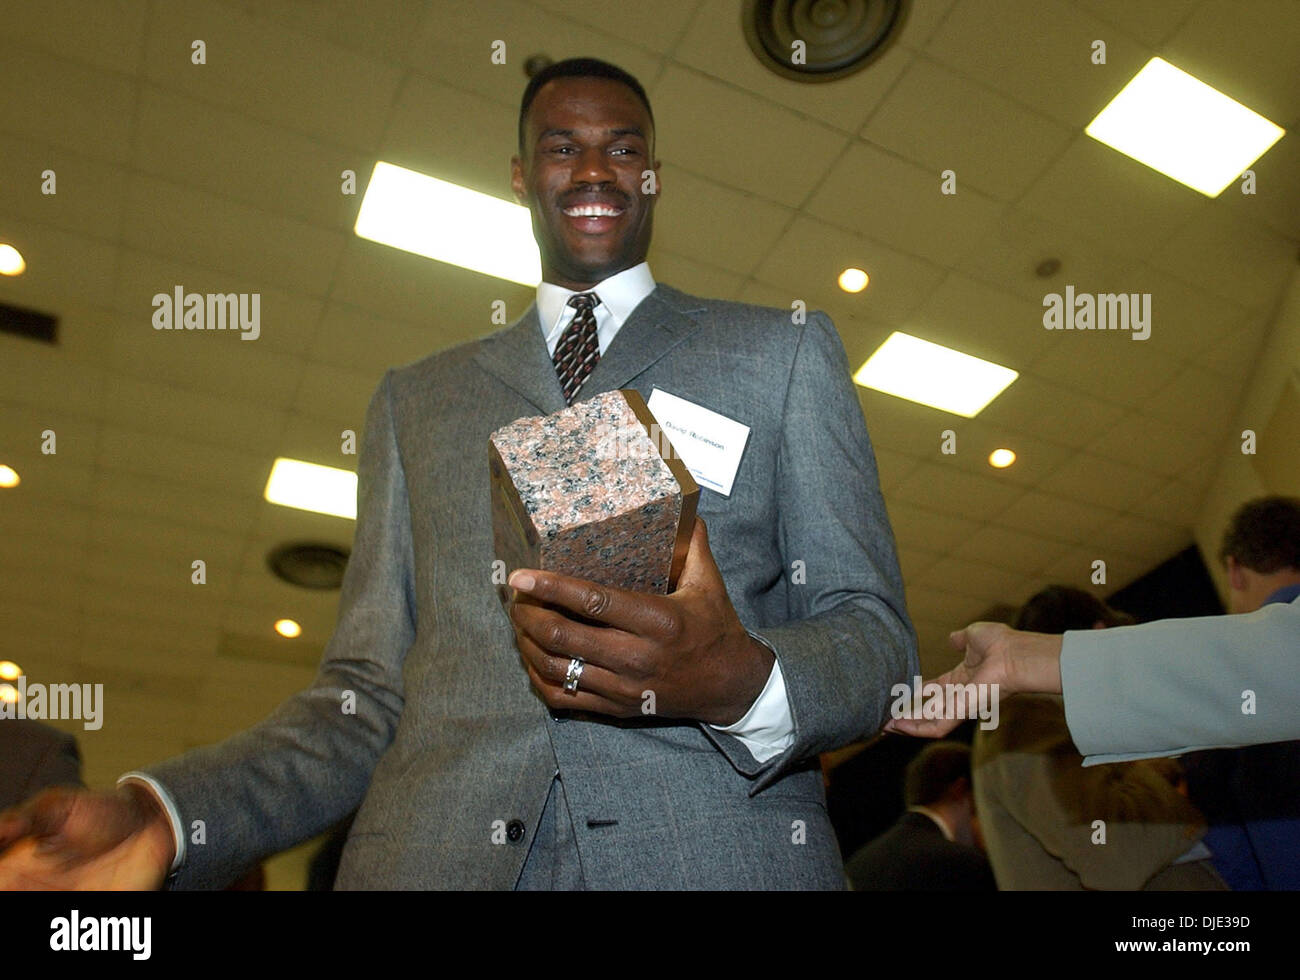 Mar 26, 2004; San Antonio, TX, USA;Former San Antonio Spurs player DAVID ROBINSON, who is the main benefactor of the Carver Academy, smiles after receiving the Texan of the Year award from Gov. Rick Perry in New Braunfels on Friday, March 26, 2004. Stock Photo